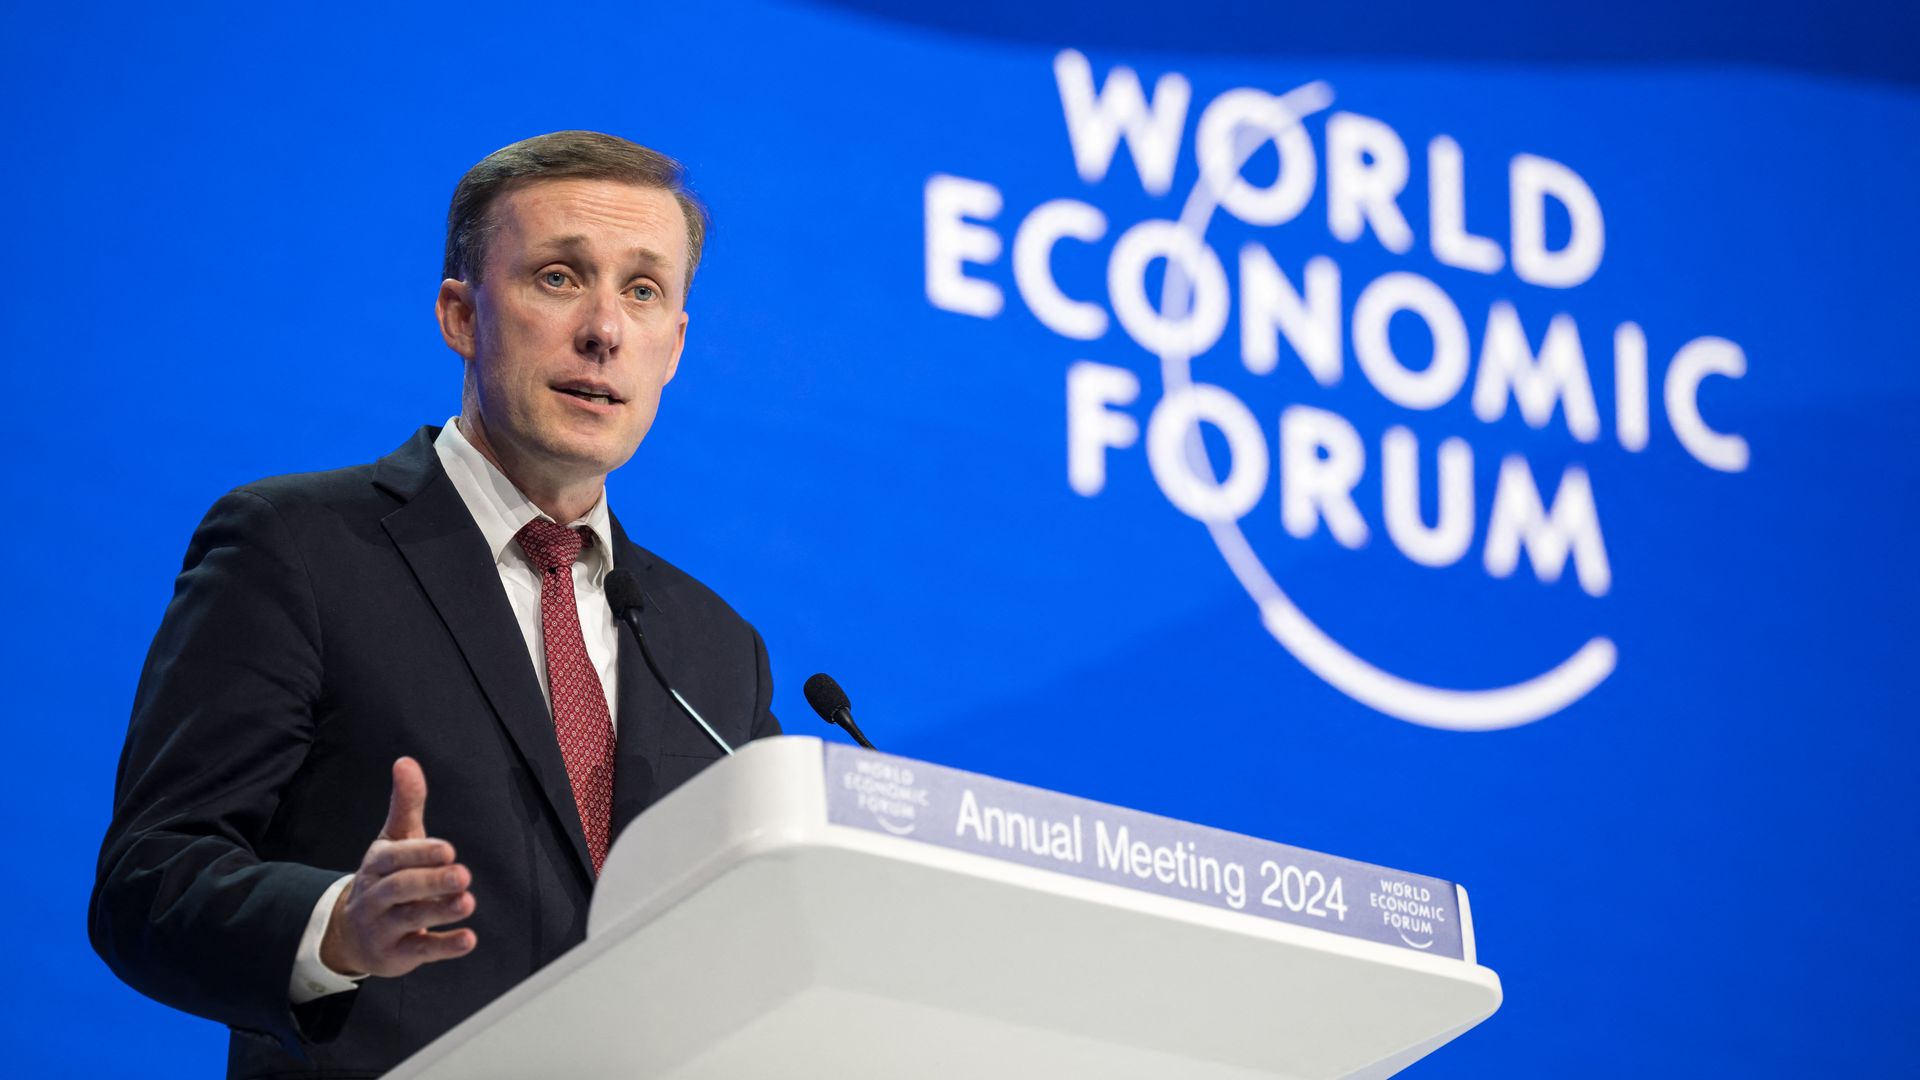 Jake Sullivan addresses the assembly at the World Economic Forum (WEF) annual meeting in Davos, 